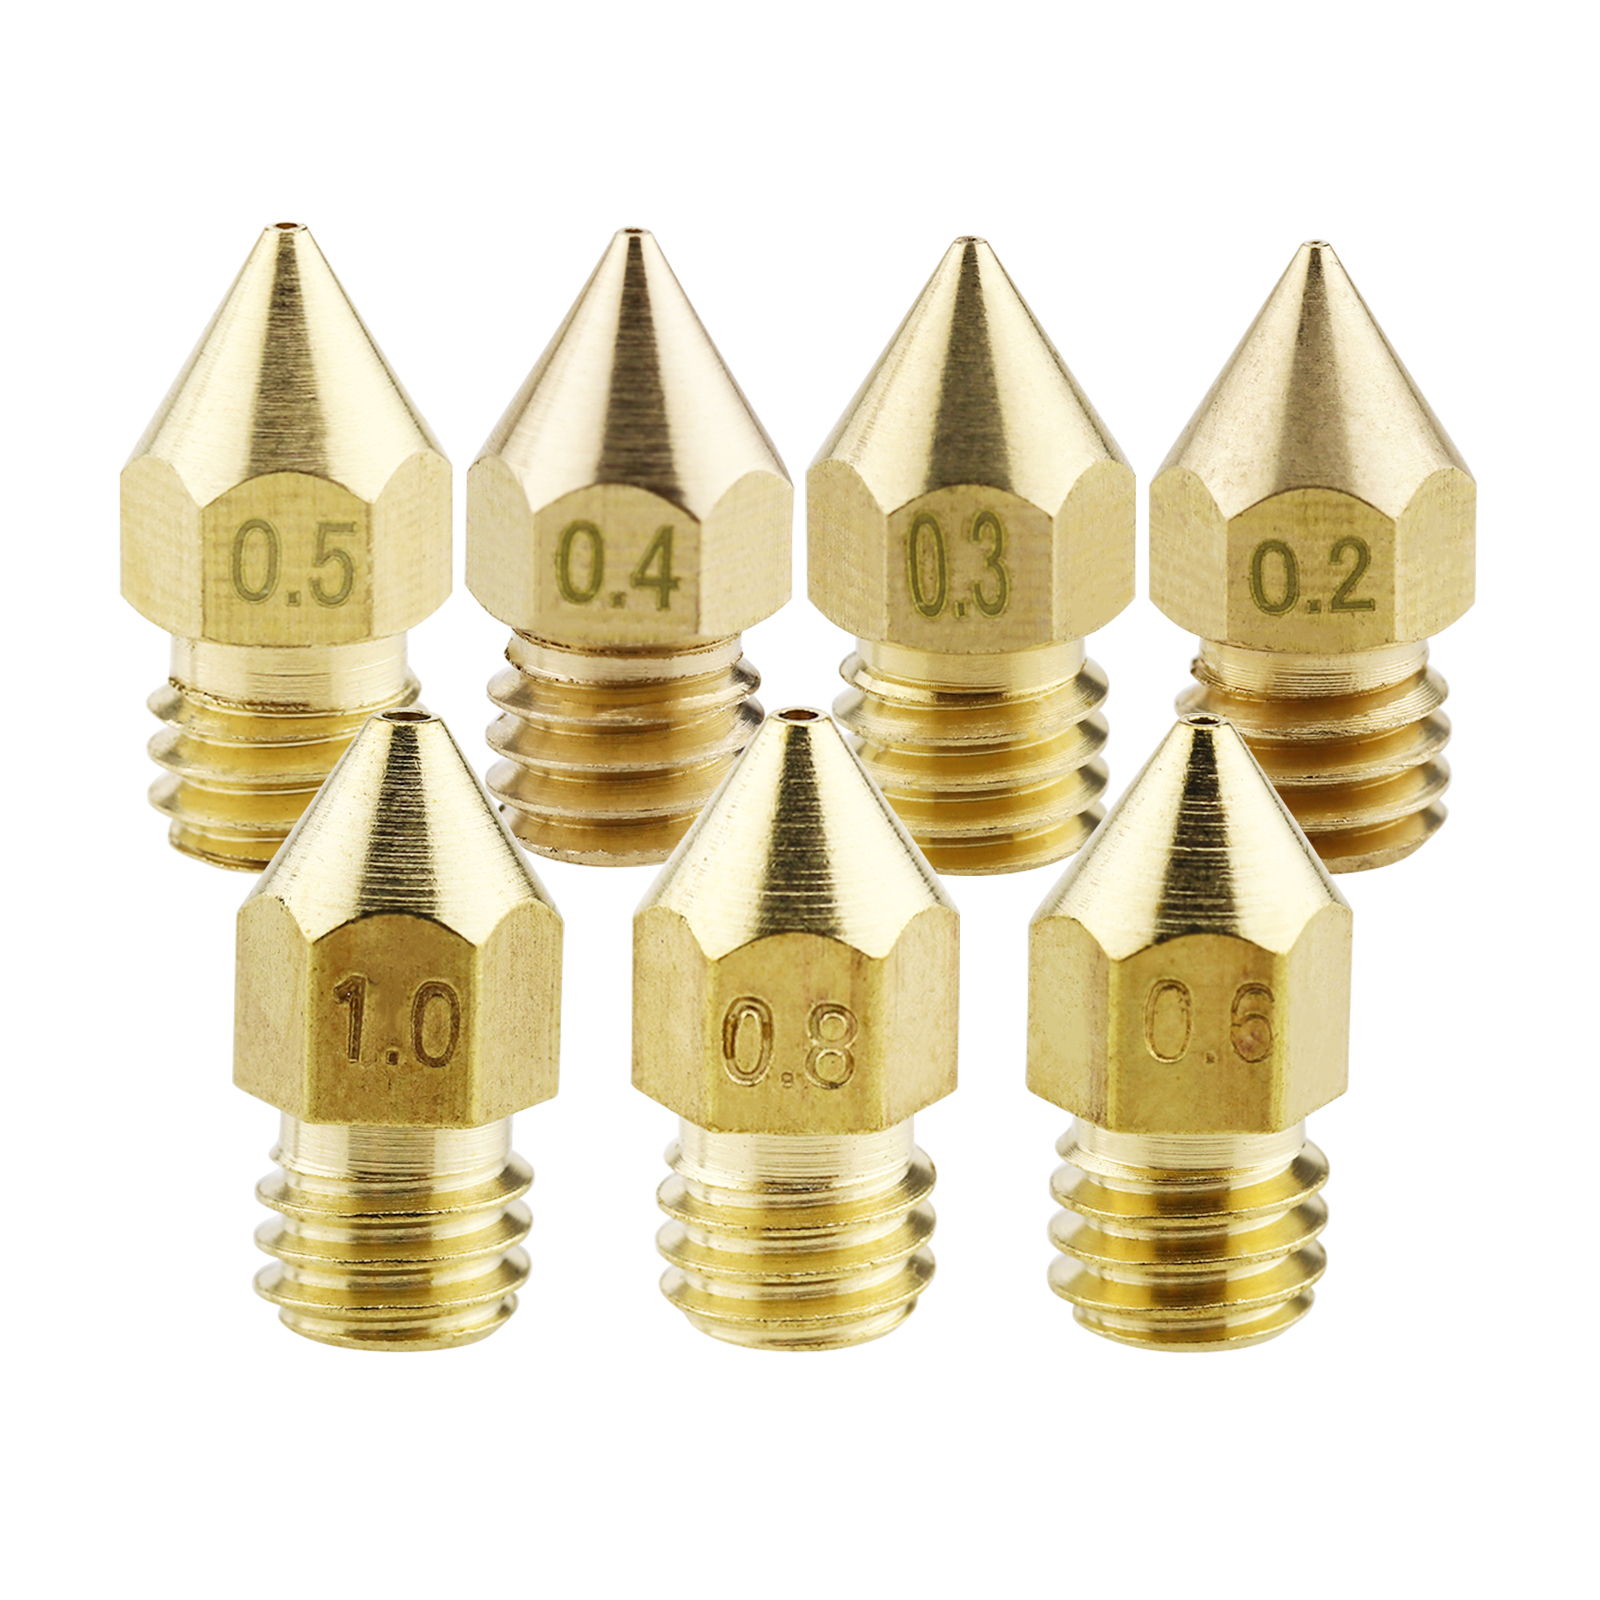 19x Nozzle Head 0.2/0.3/0.4/0.5/0.6/0.8/1mm For MK8 Extruder M6 Thread ...